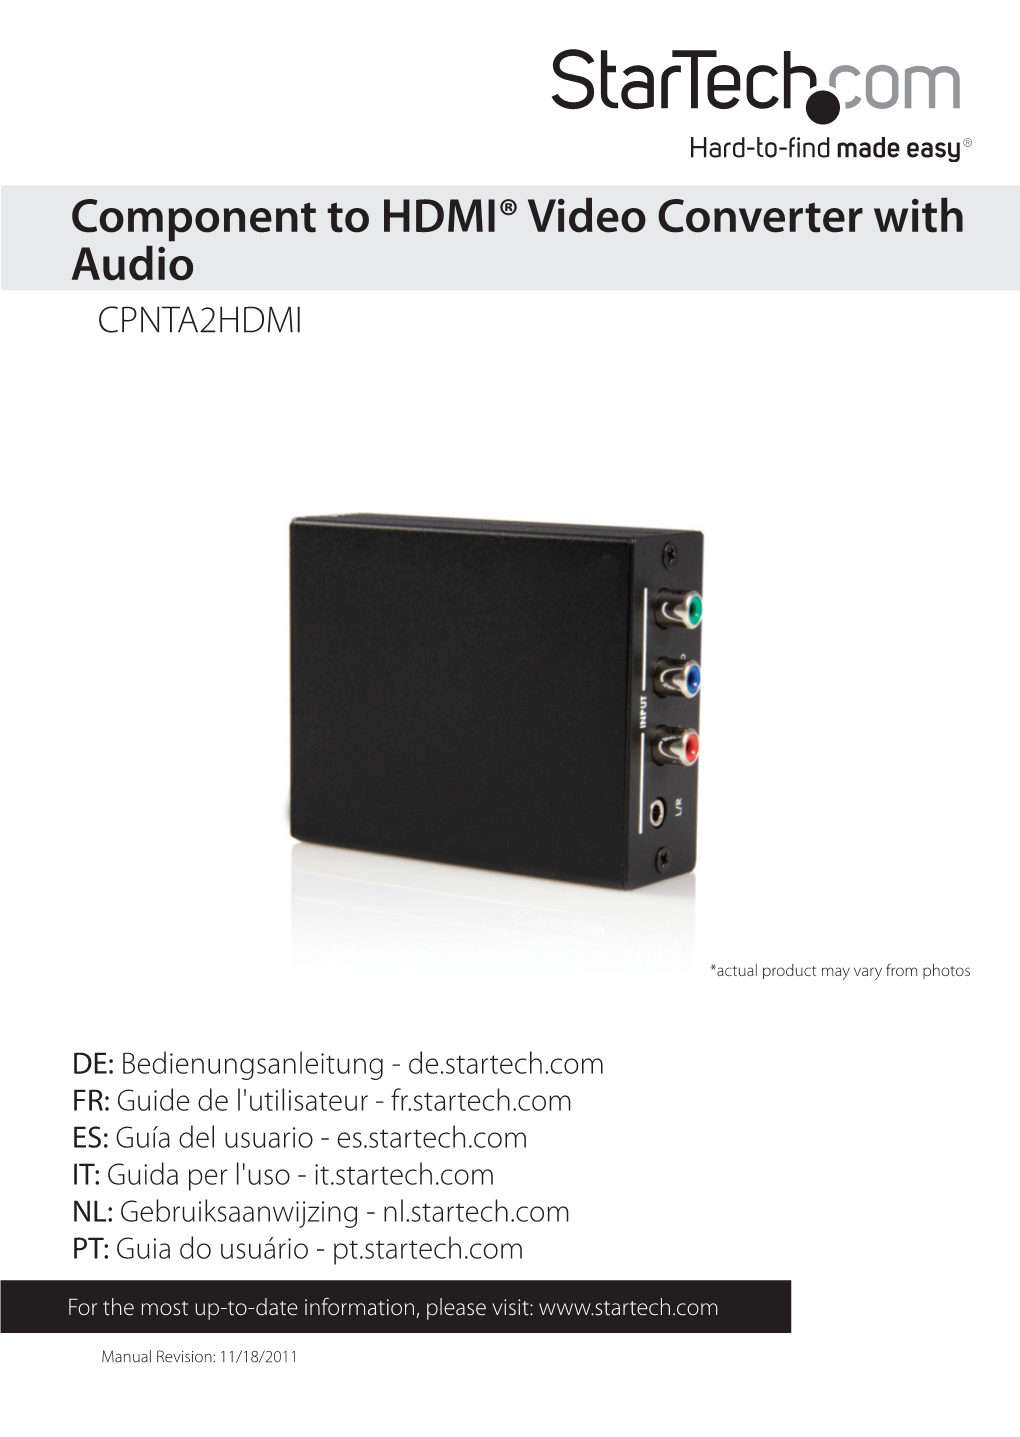 Component to HDMI® Video Converter with Audio CPNTA2HDMI